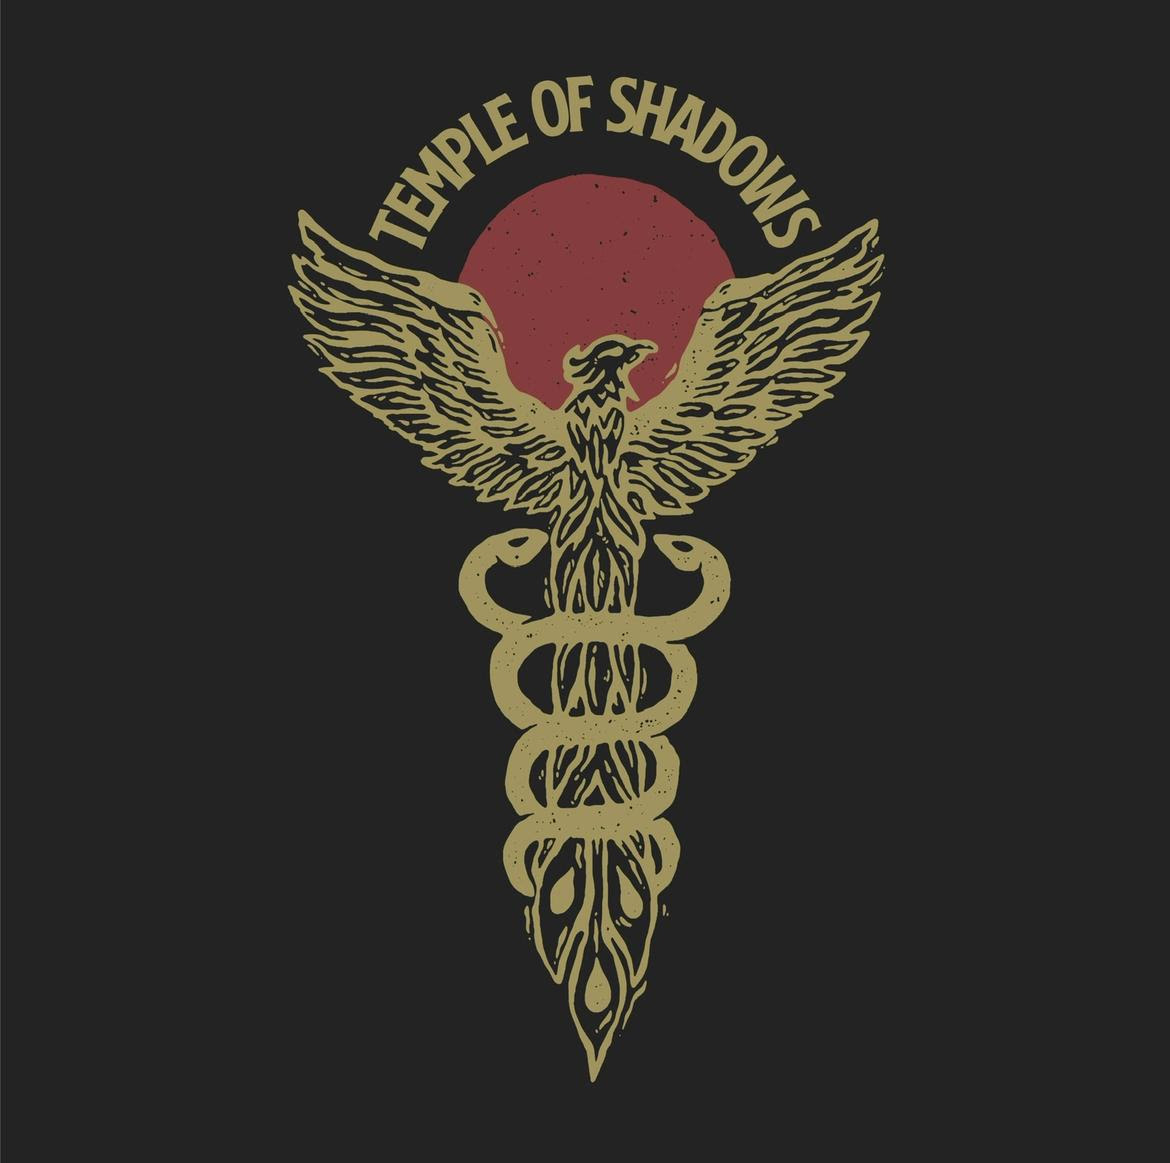 Graphic design of a winged serpent around a sword, with "Temple of Shadows" text and a red circular backdrop.